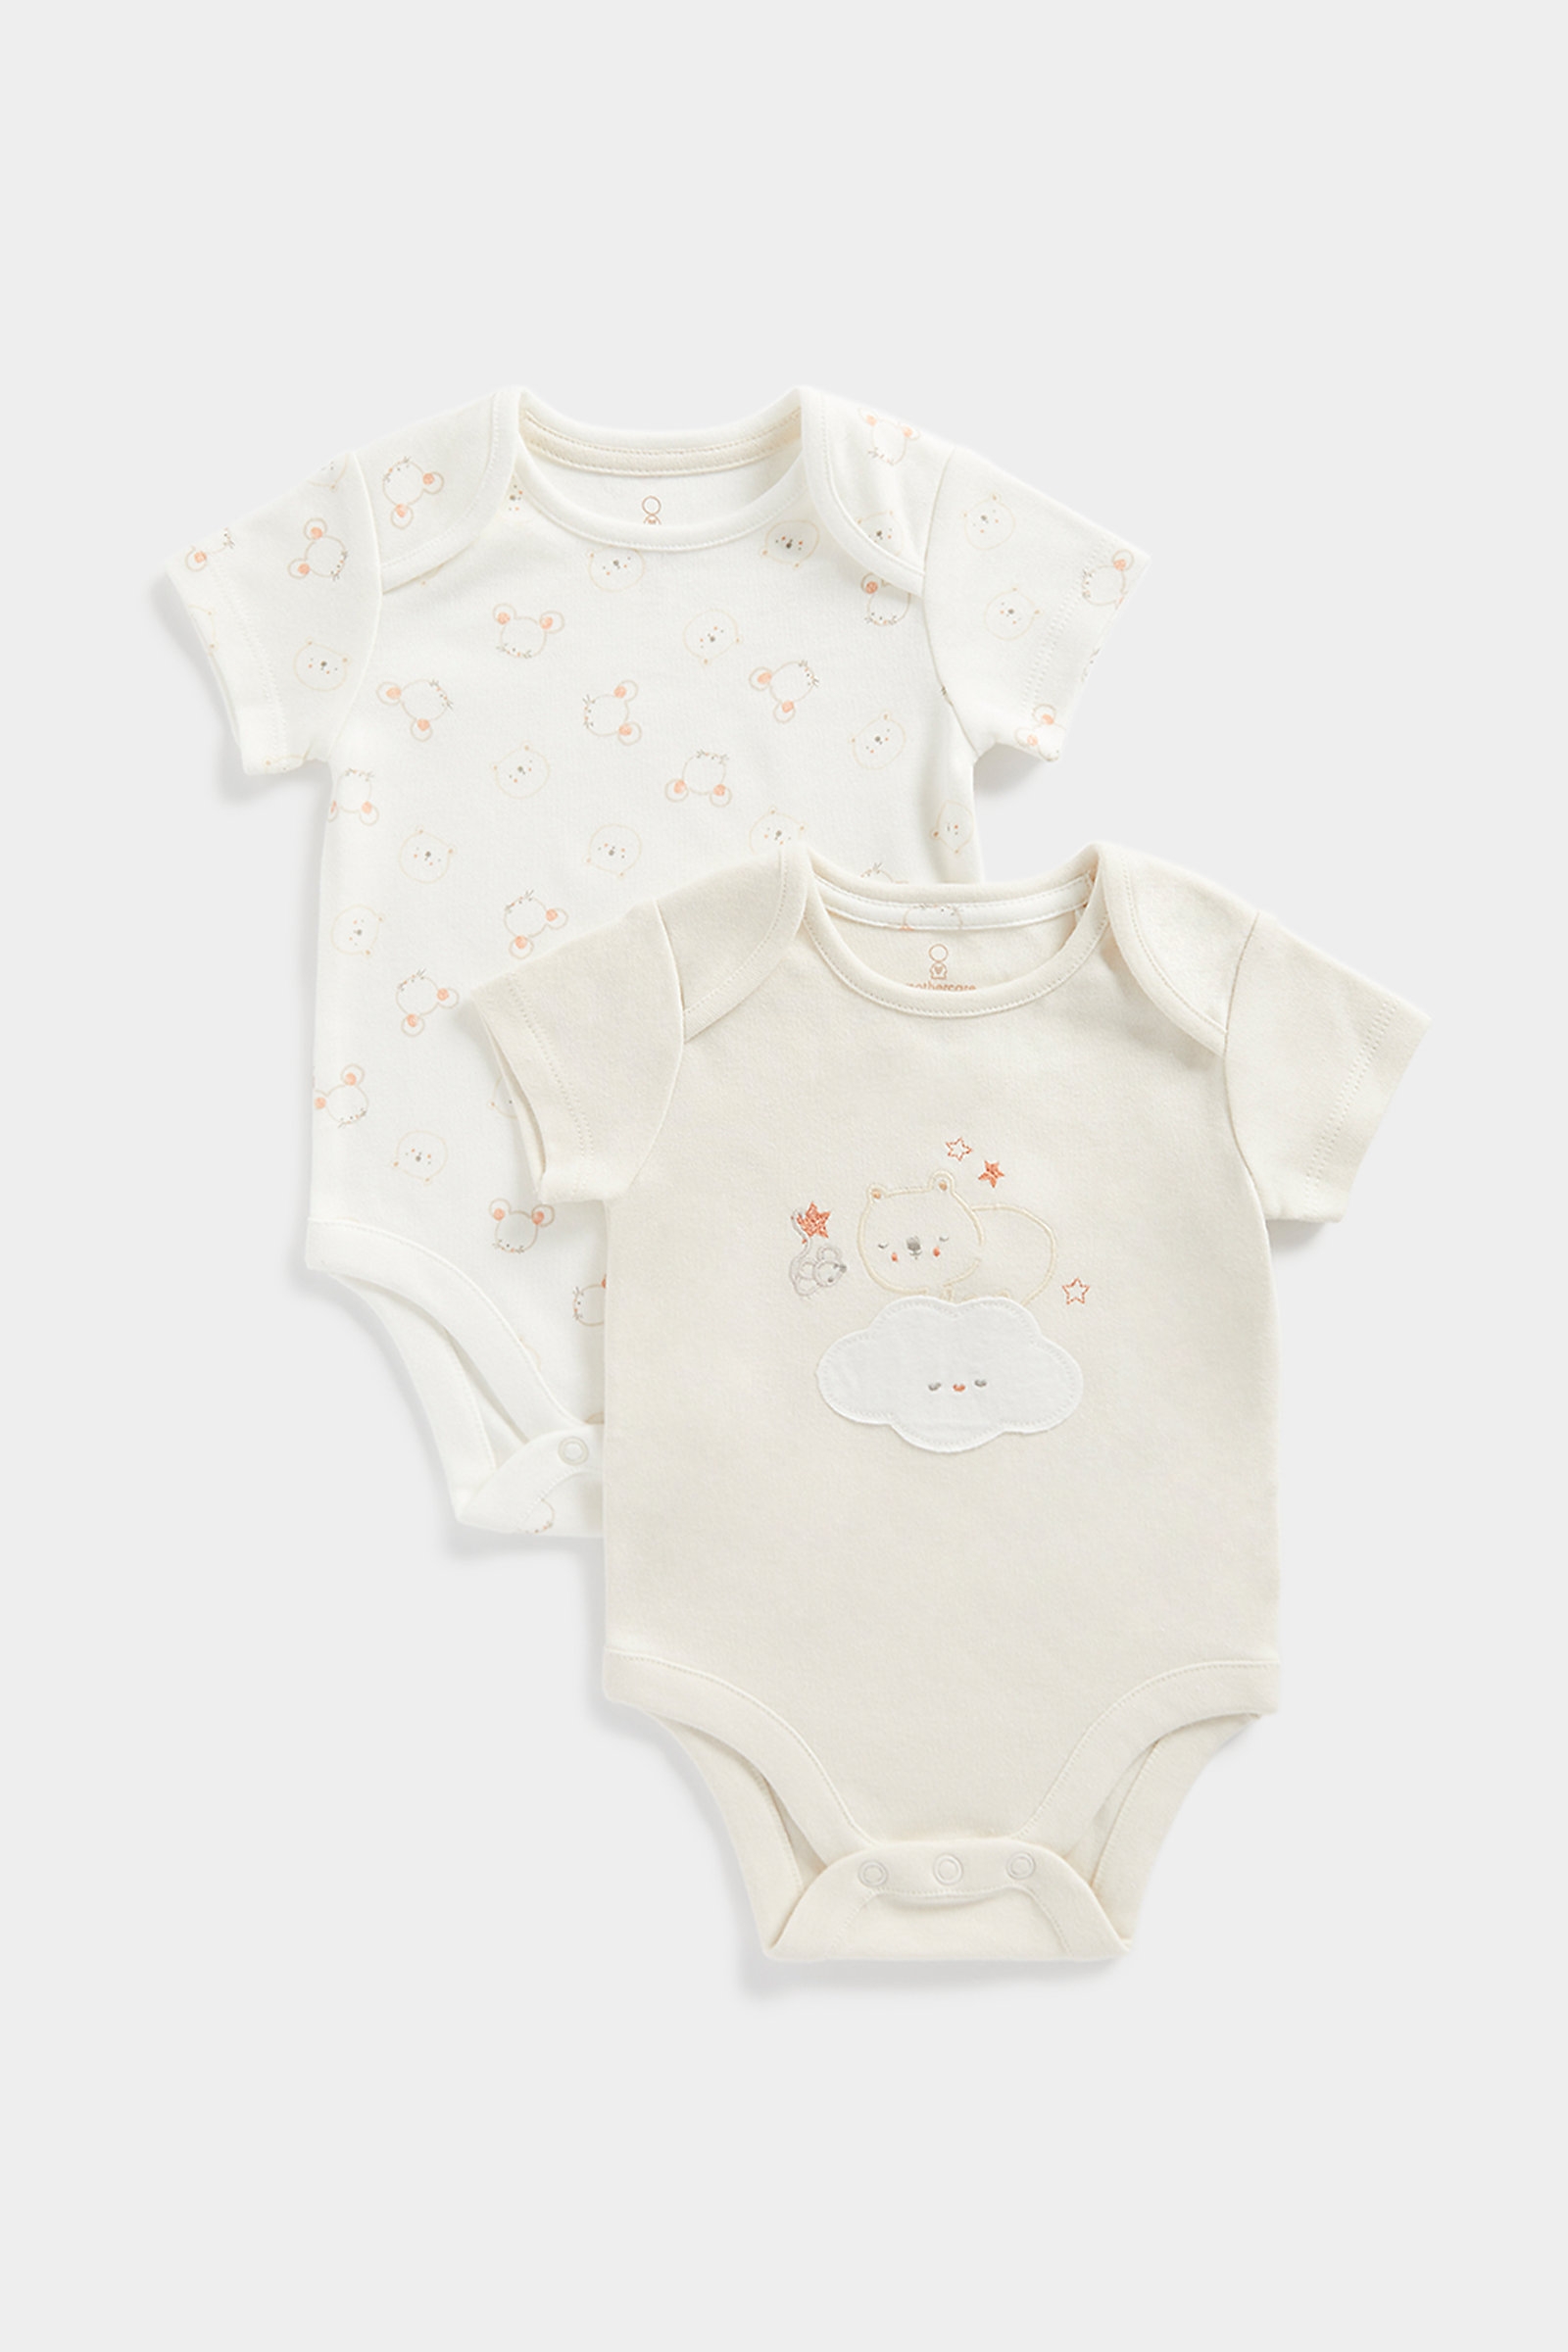 Boys Half Sleeves Bodysuit My First Bear and Mouse Bodysuits  -Cream